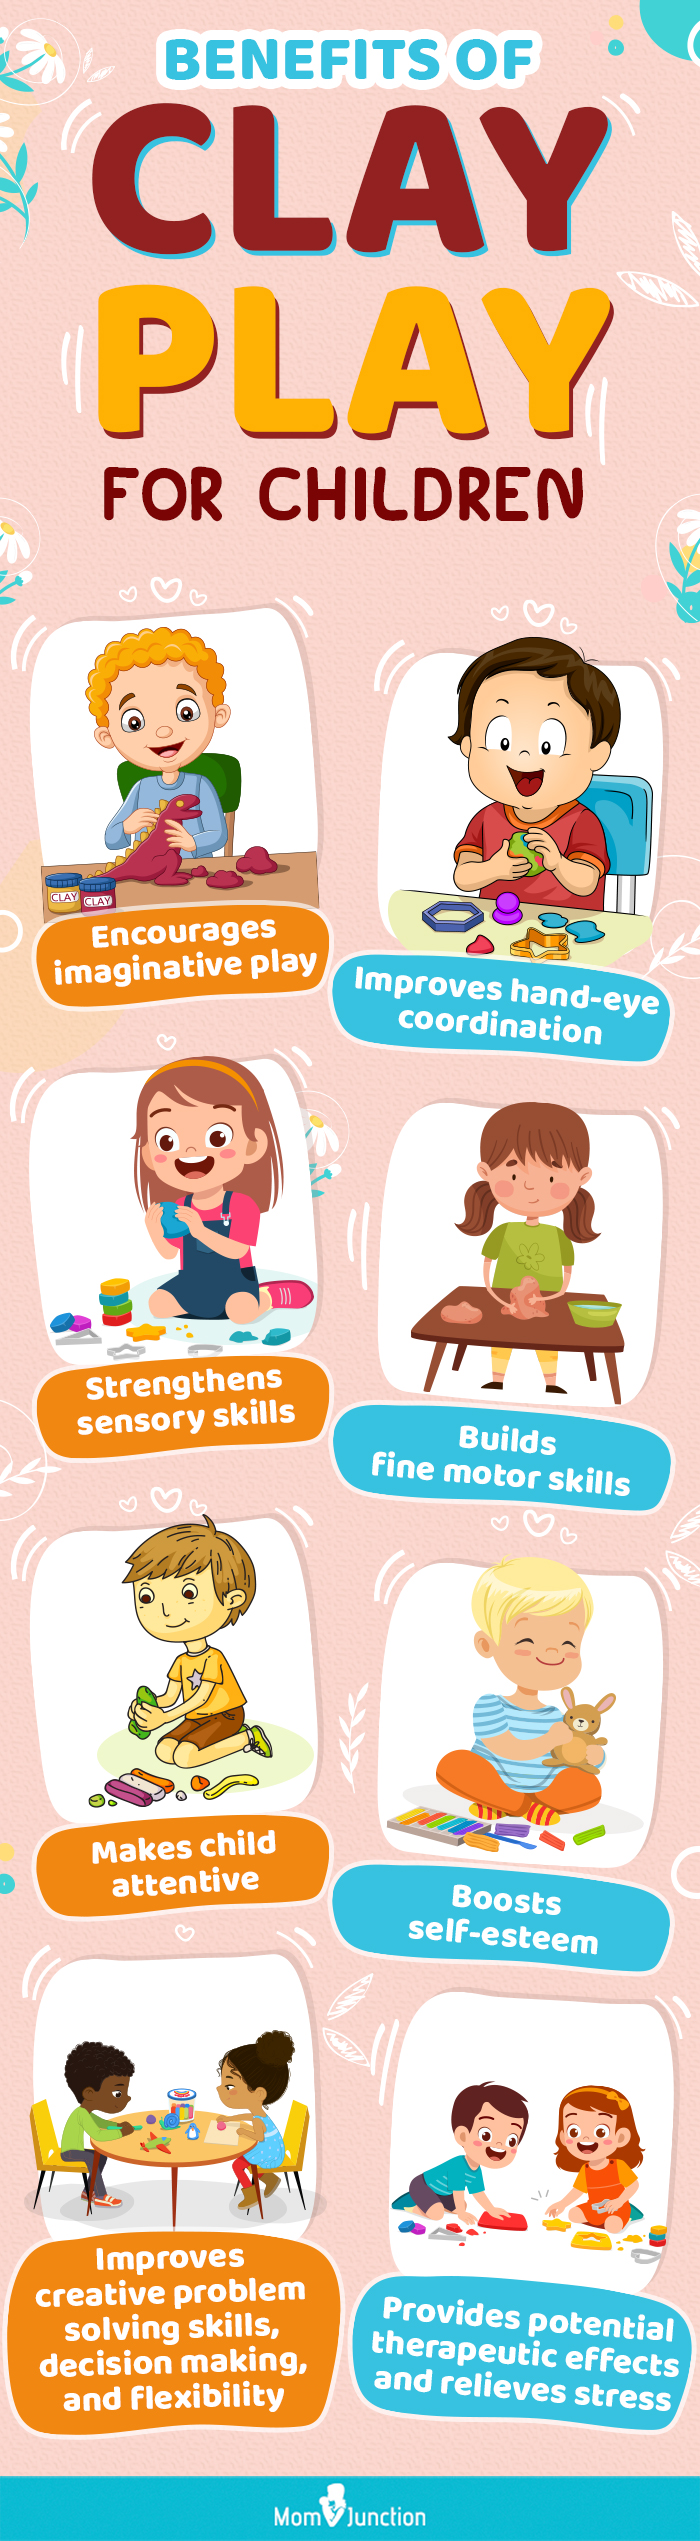 benefits of clay play for children [infographic]